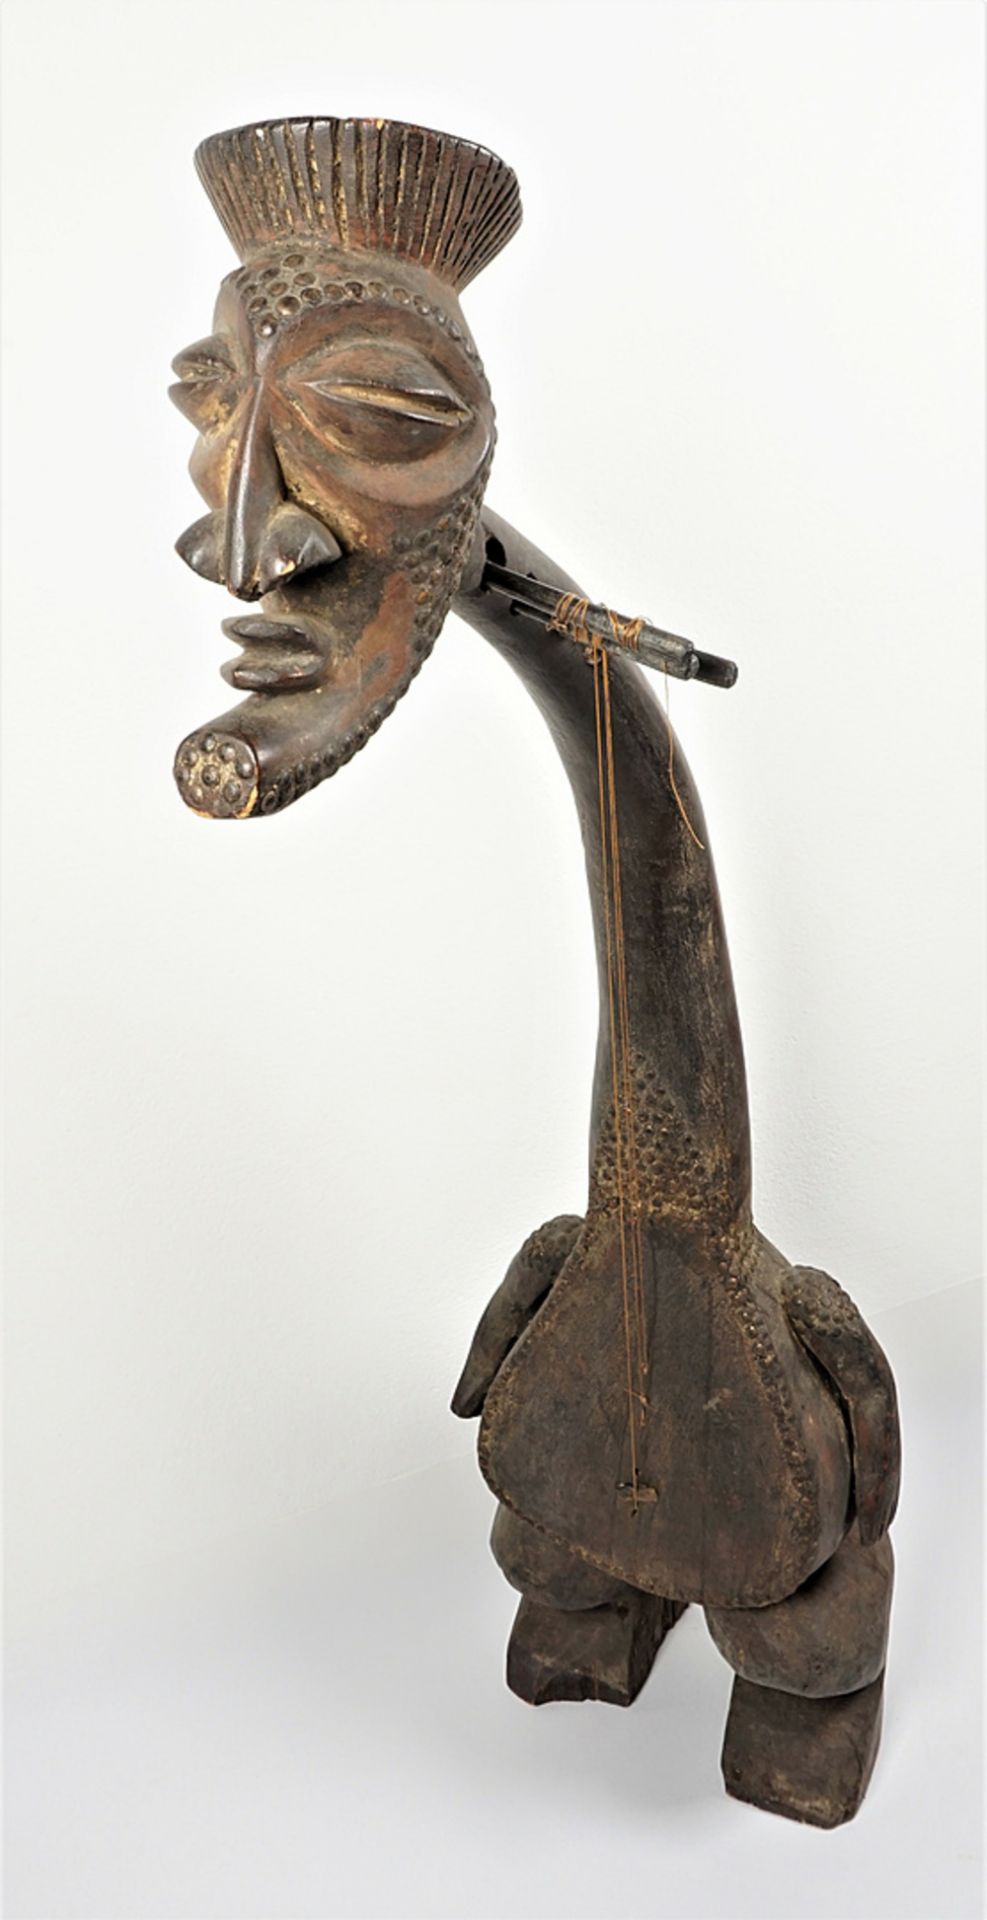 Figurative musical instrument similar to a kundi, DR Congo - Image 2 of 4